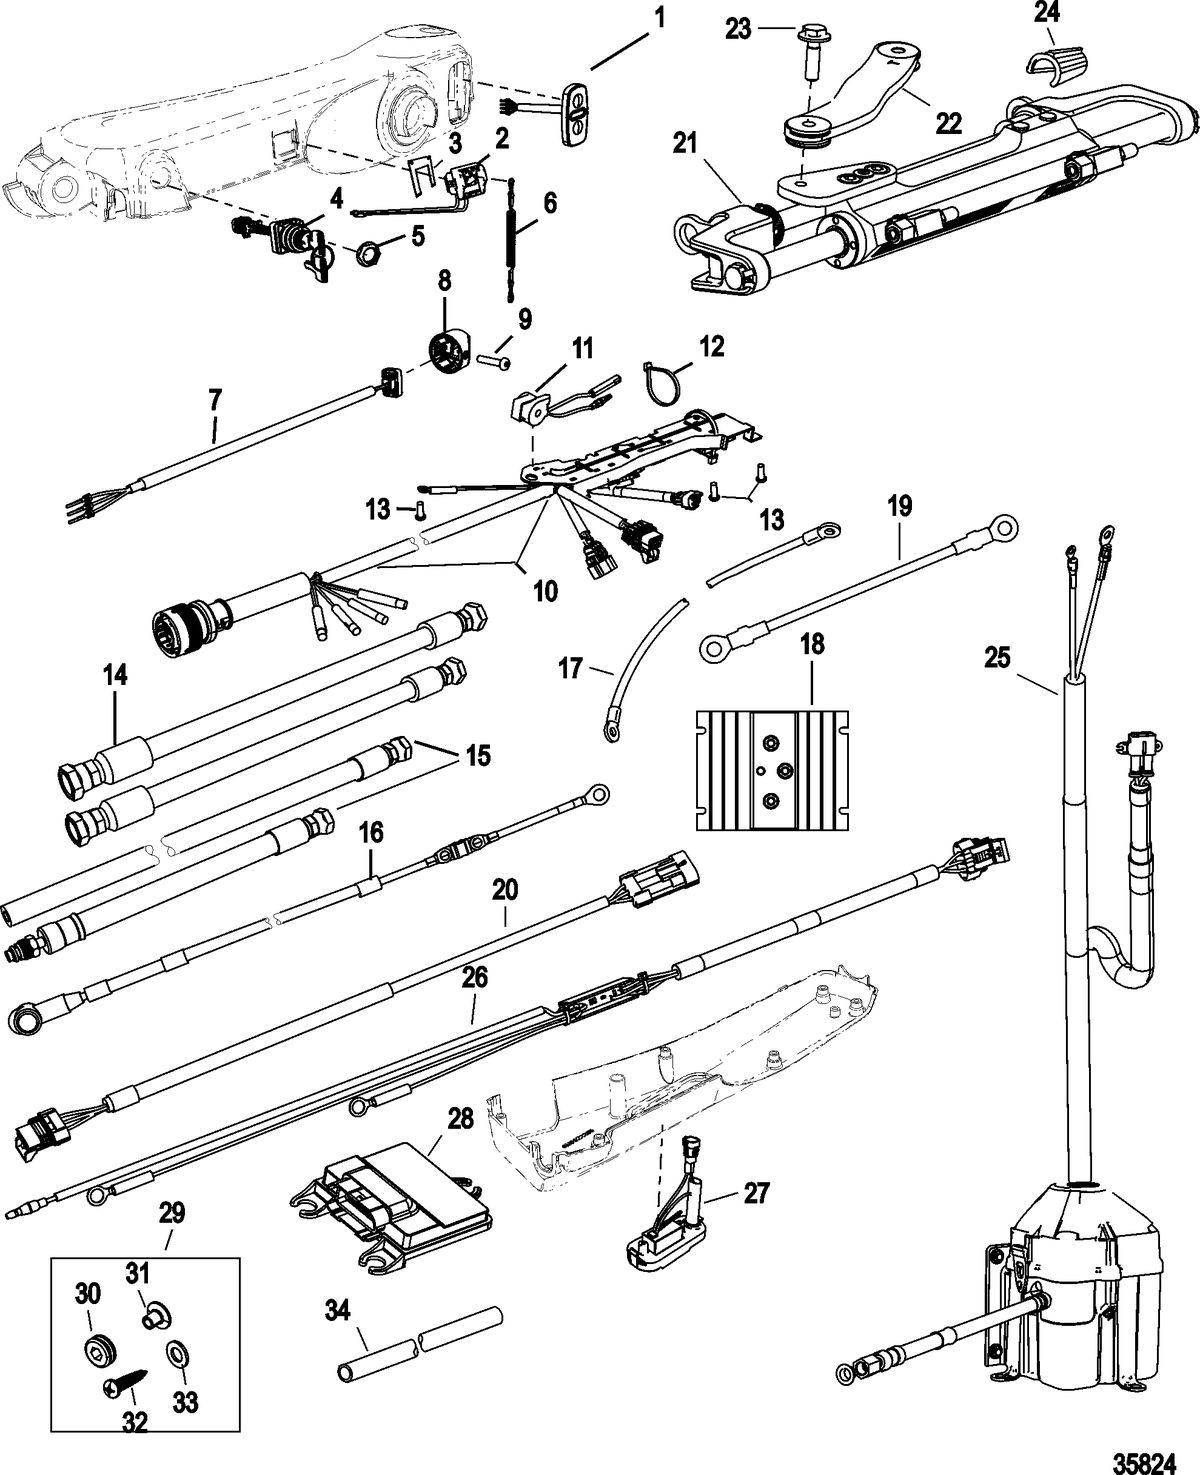 ACCESSORIES STEERING SYSTEMS AND COMPONENTS Tiller Handle Kit Components(Big Tiller-Power Steer, DTS)